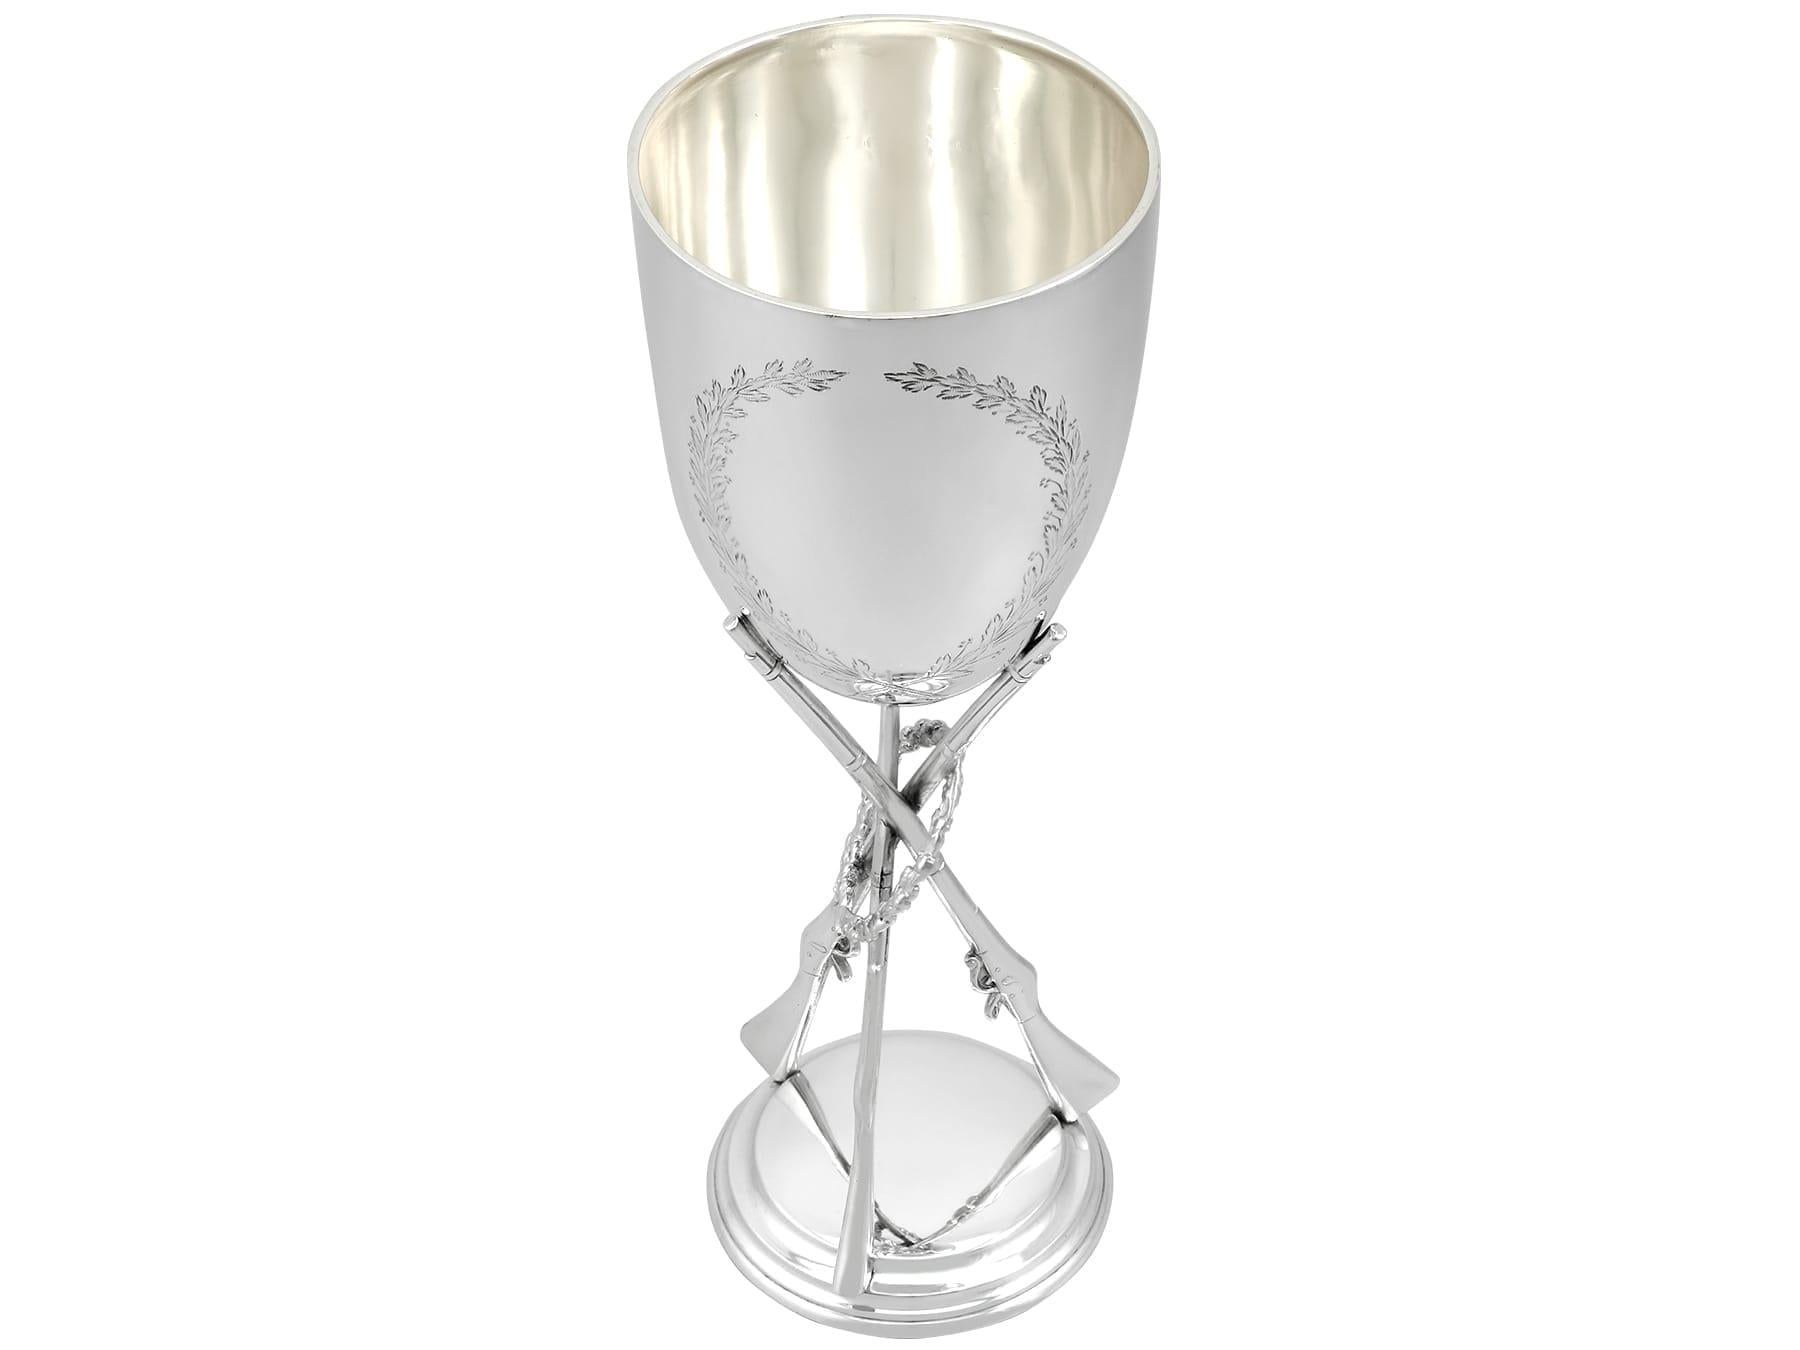 An exceptional, fine and impressive antique Victorian English sterling silver presentation cup with shooting/rifle interest; an addition to our diverse presentation silverware collection.

This exceptional, fine and impressive antique Victorian